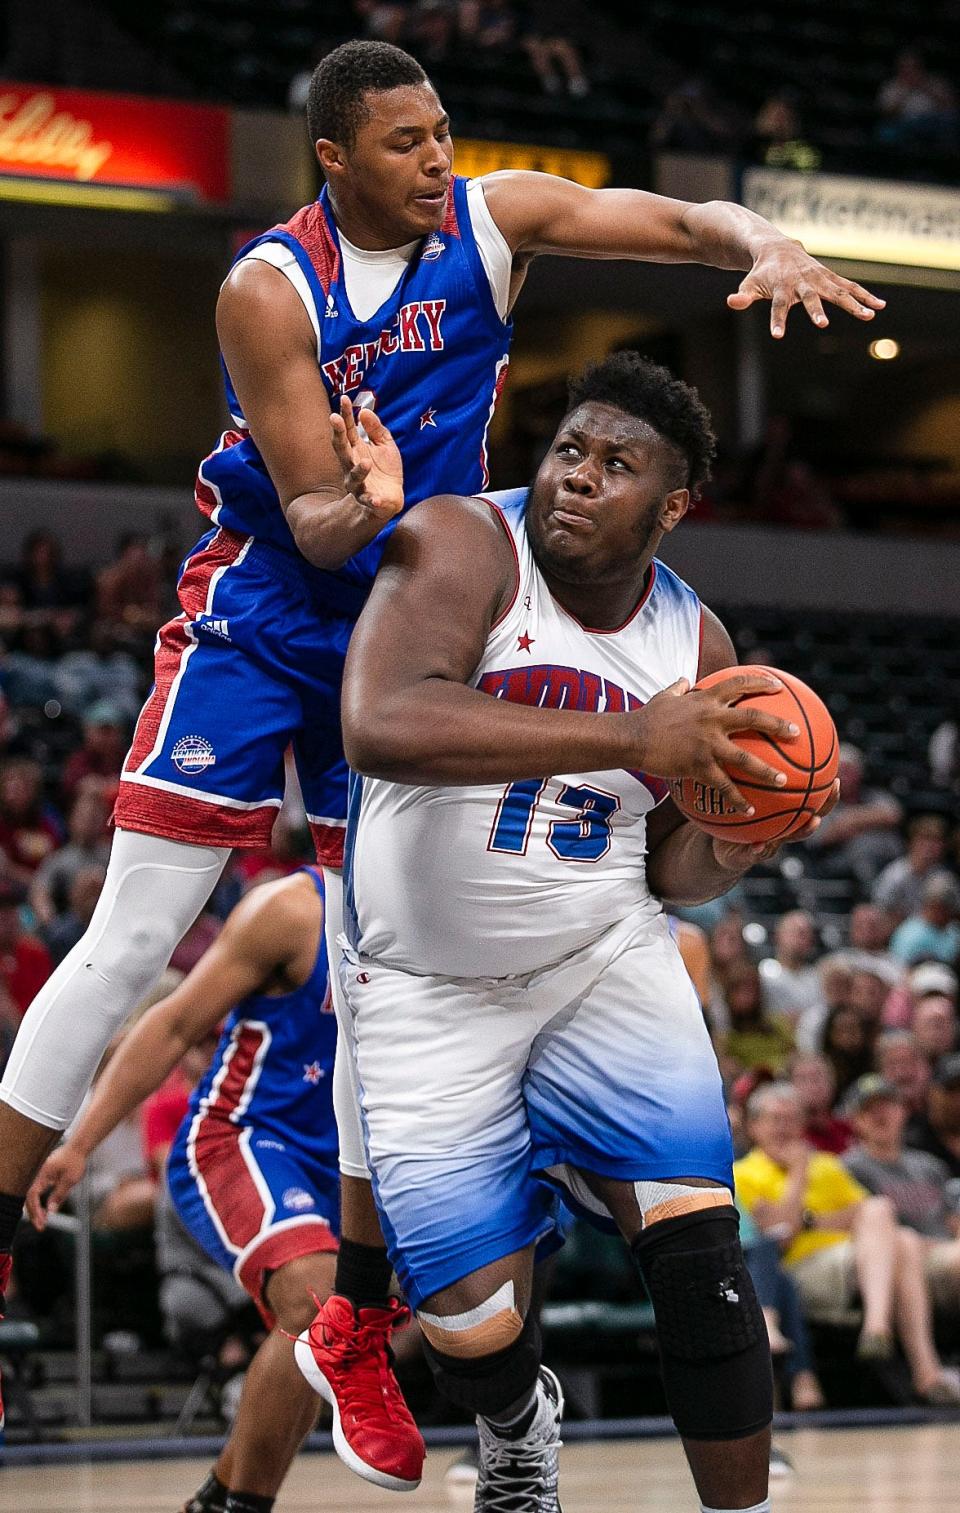 Ben Davis's Dawand Jones (13) drives for a layup against Kentucky's Isaiah Cozart (9) during the Indiana All-Stars vs. Kentucky All-Stars game on June 8, 2019, in Indianapolis.